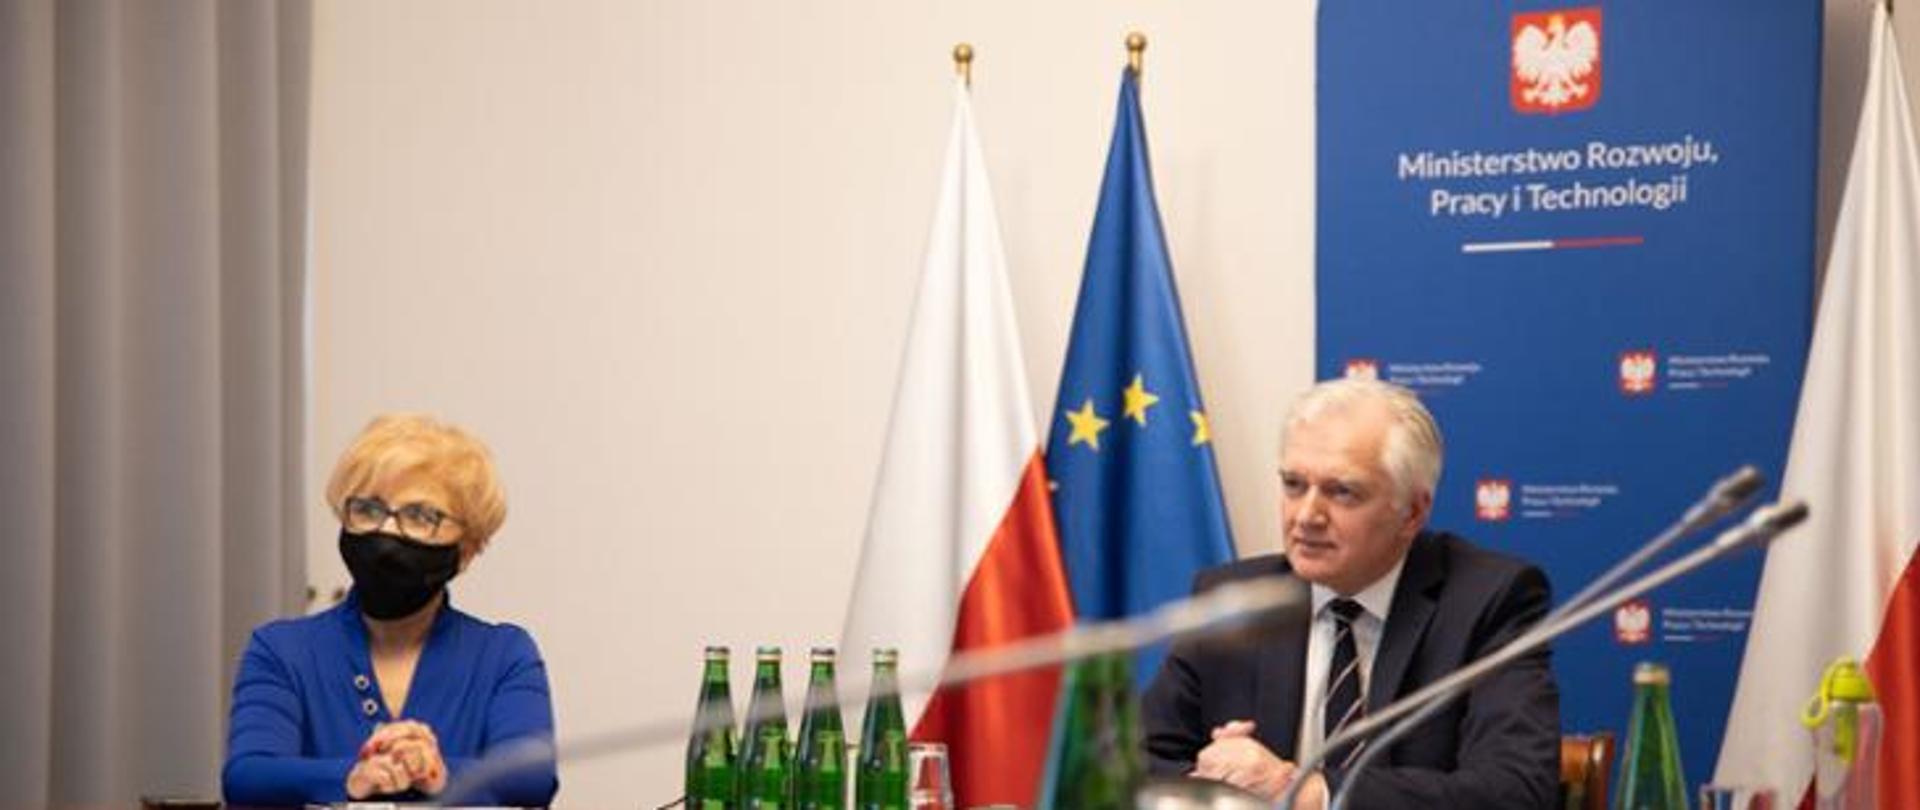 Prime Minister Jarosław Gowin and Deputy Minister of Economic Development, Labour and Technology Iwona Michałek at the meeting